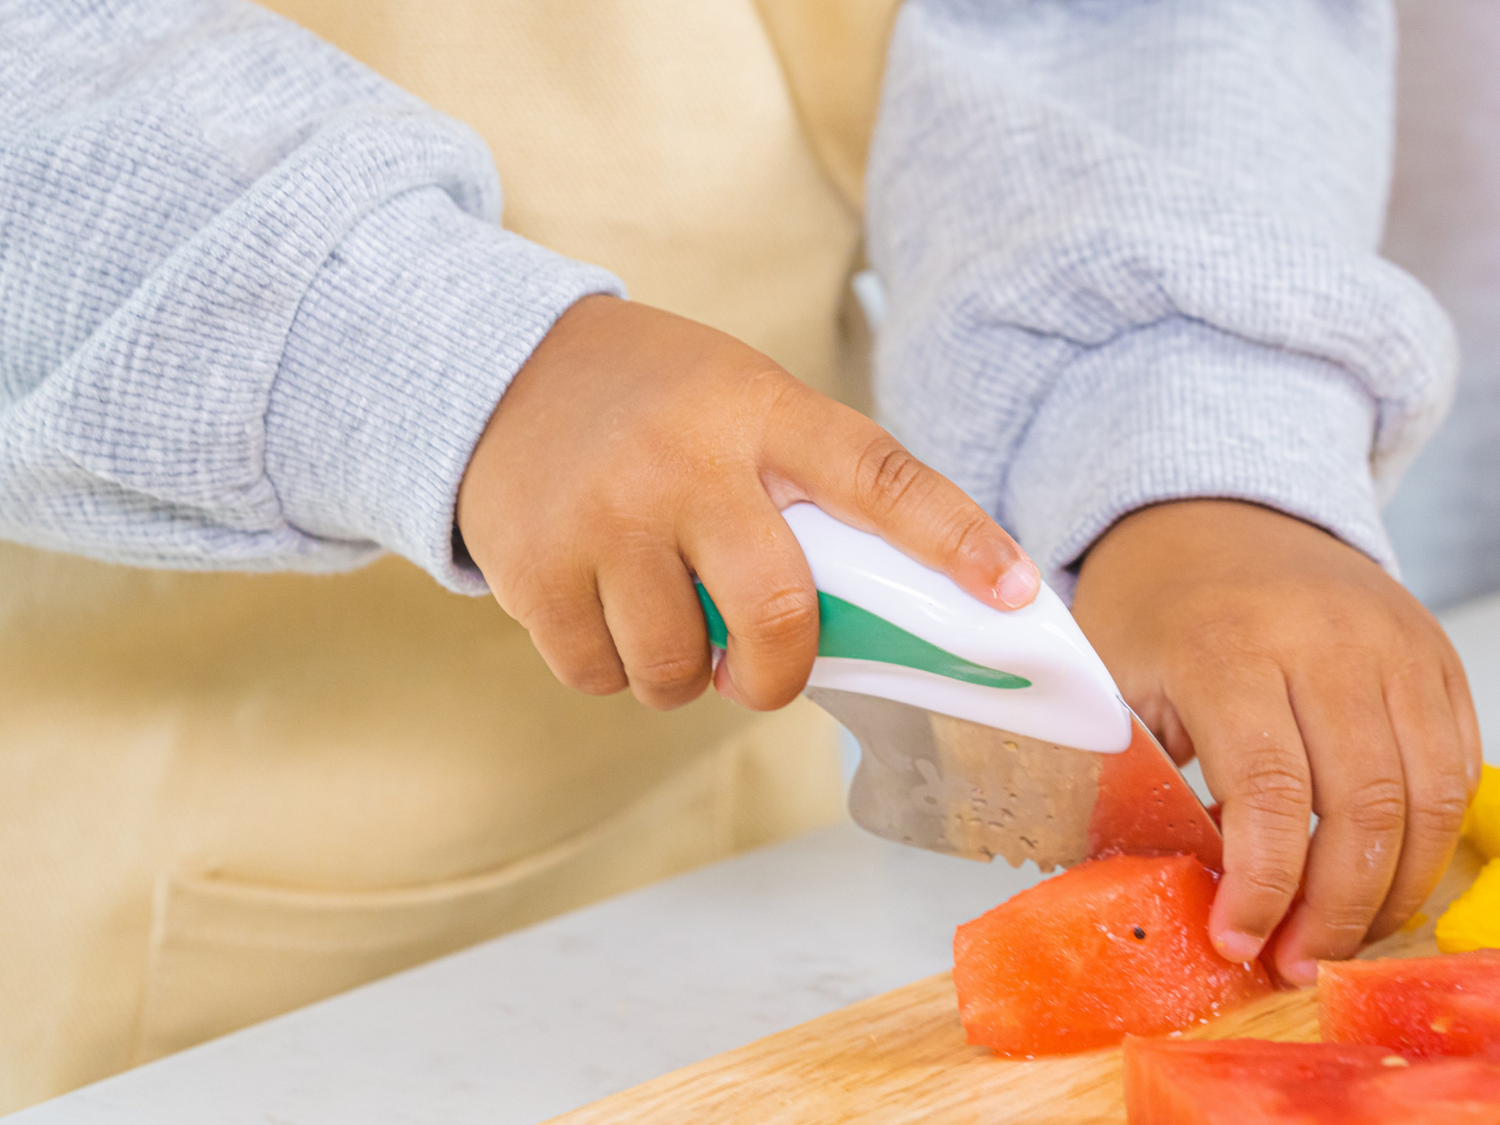 introducing the doddl toddler knife. little hands holding the doddl knife safely chopping a carrot into slices